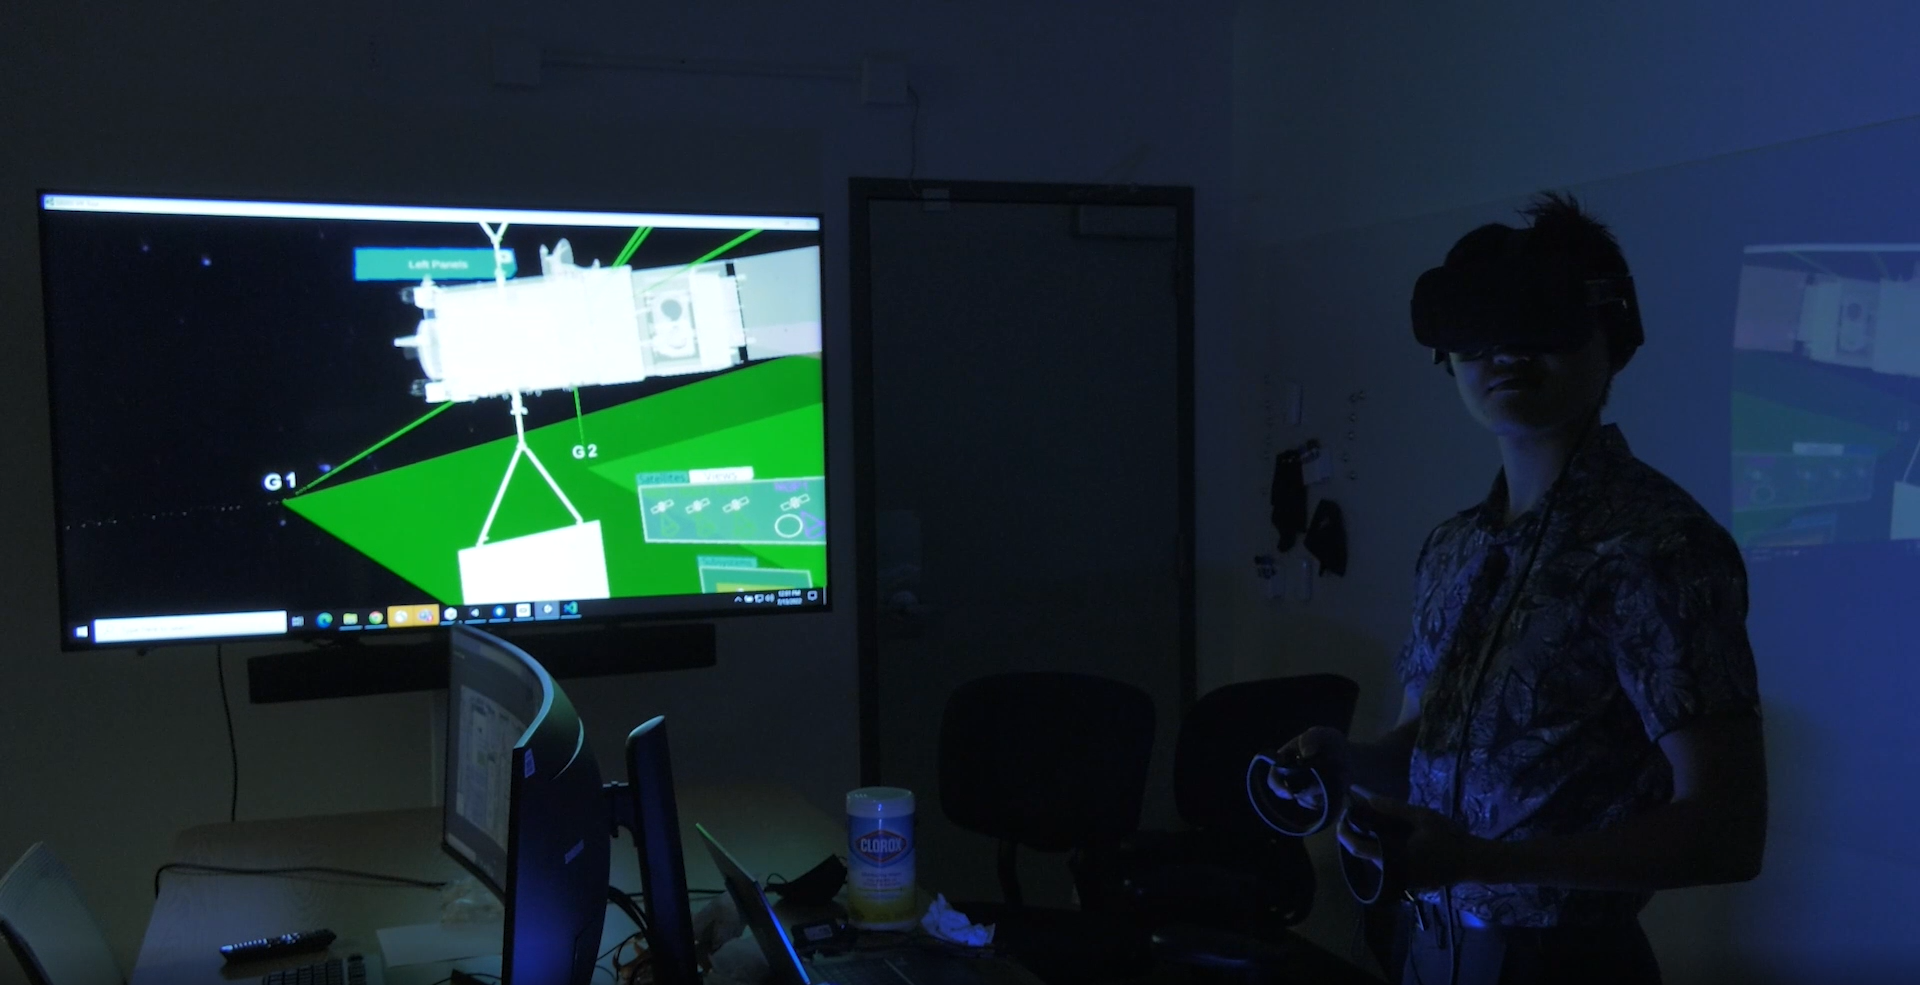 This year, the teams utilized augmented and virtual reality (AR/VR) technology to help analyze their projects and identify gaps or areas of needed improvement.